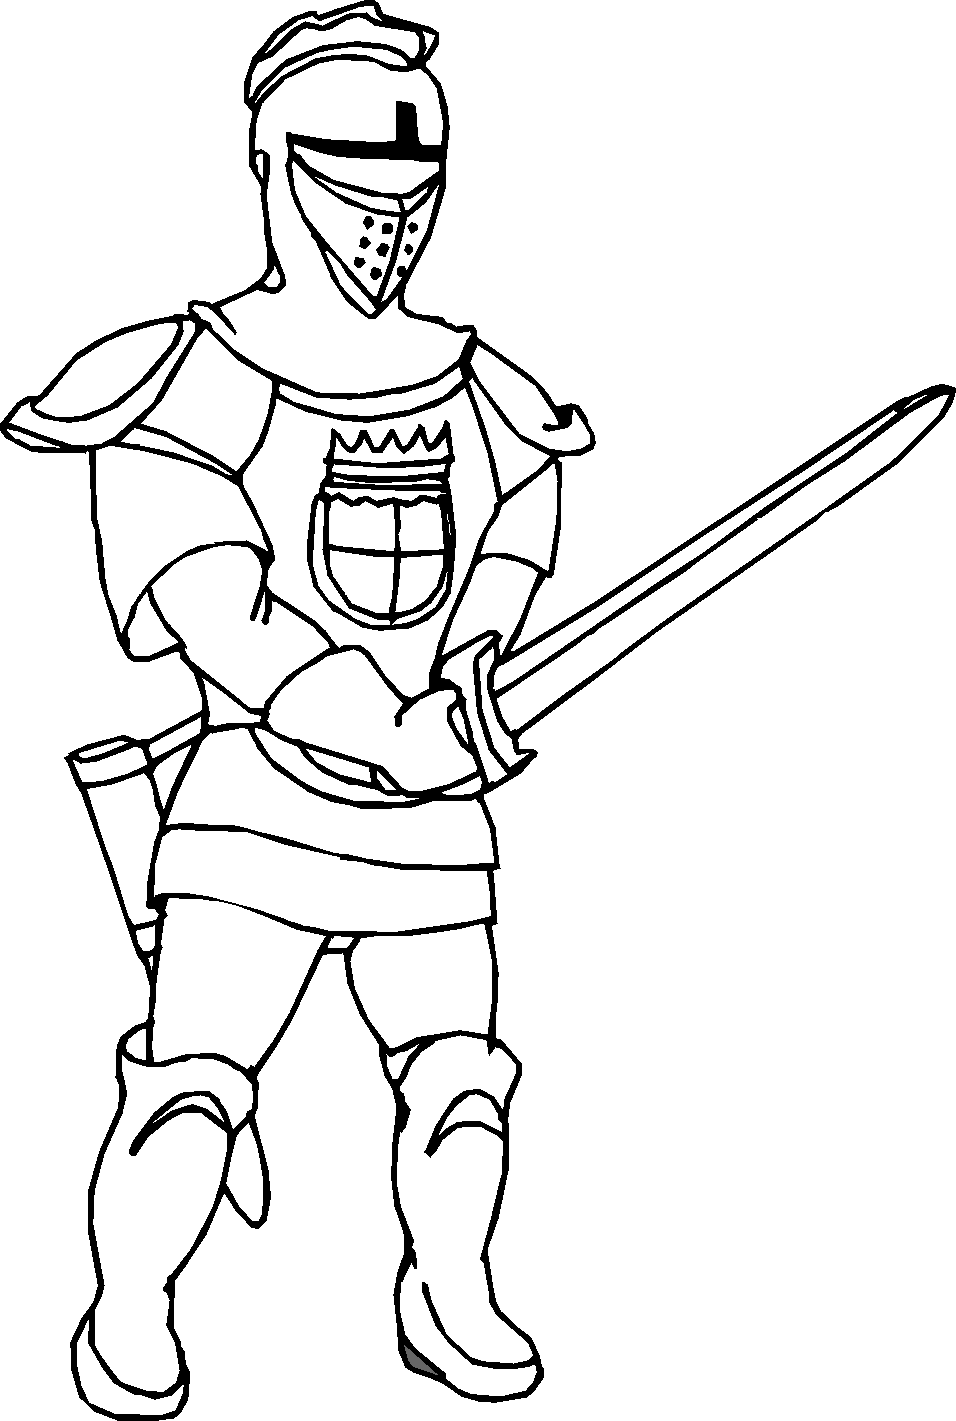 knight coloring pages knight coloring pages to download and print for free coloring knight pages 